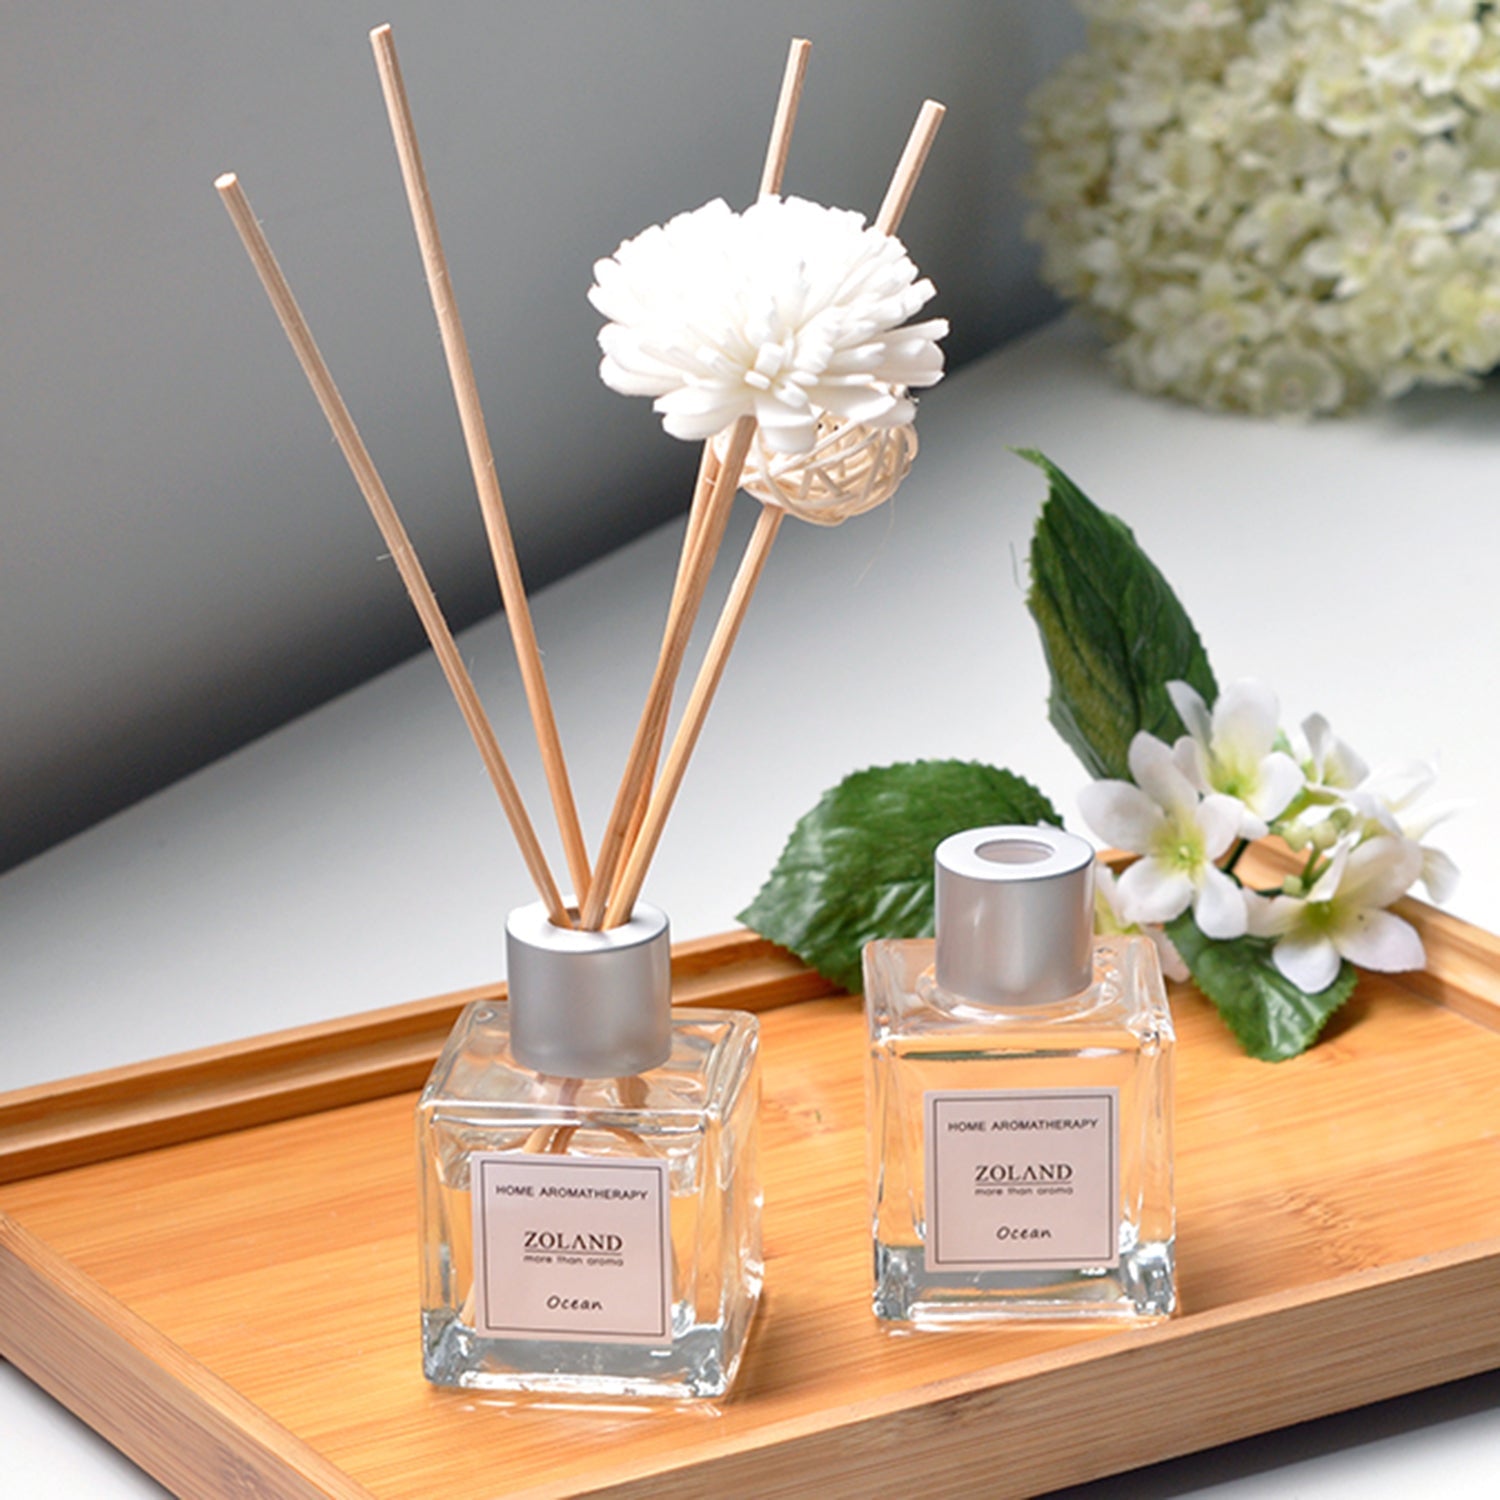 ZOLAND Reed Diffuser 50ML Premium Essential Oil Aromatherapy Square Bottle with Reed Stick and Sola Flower Reed Diffuser ZOLAND 